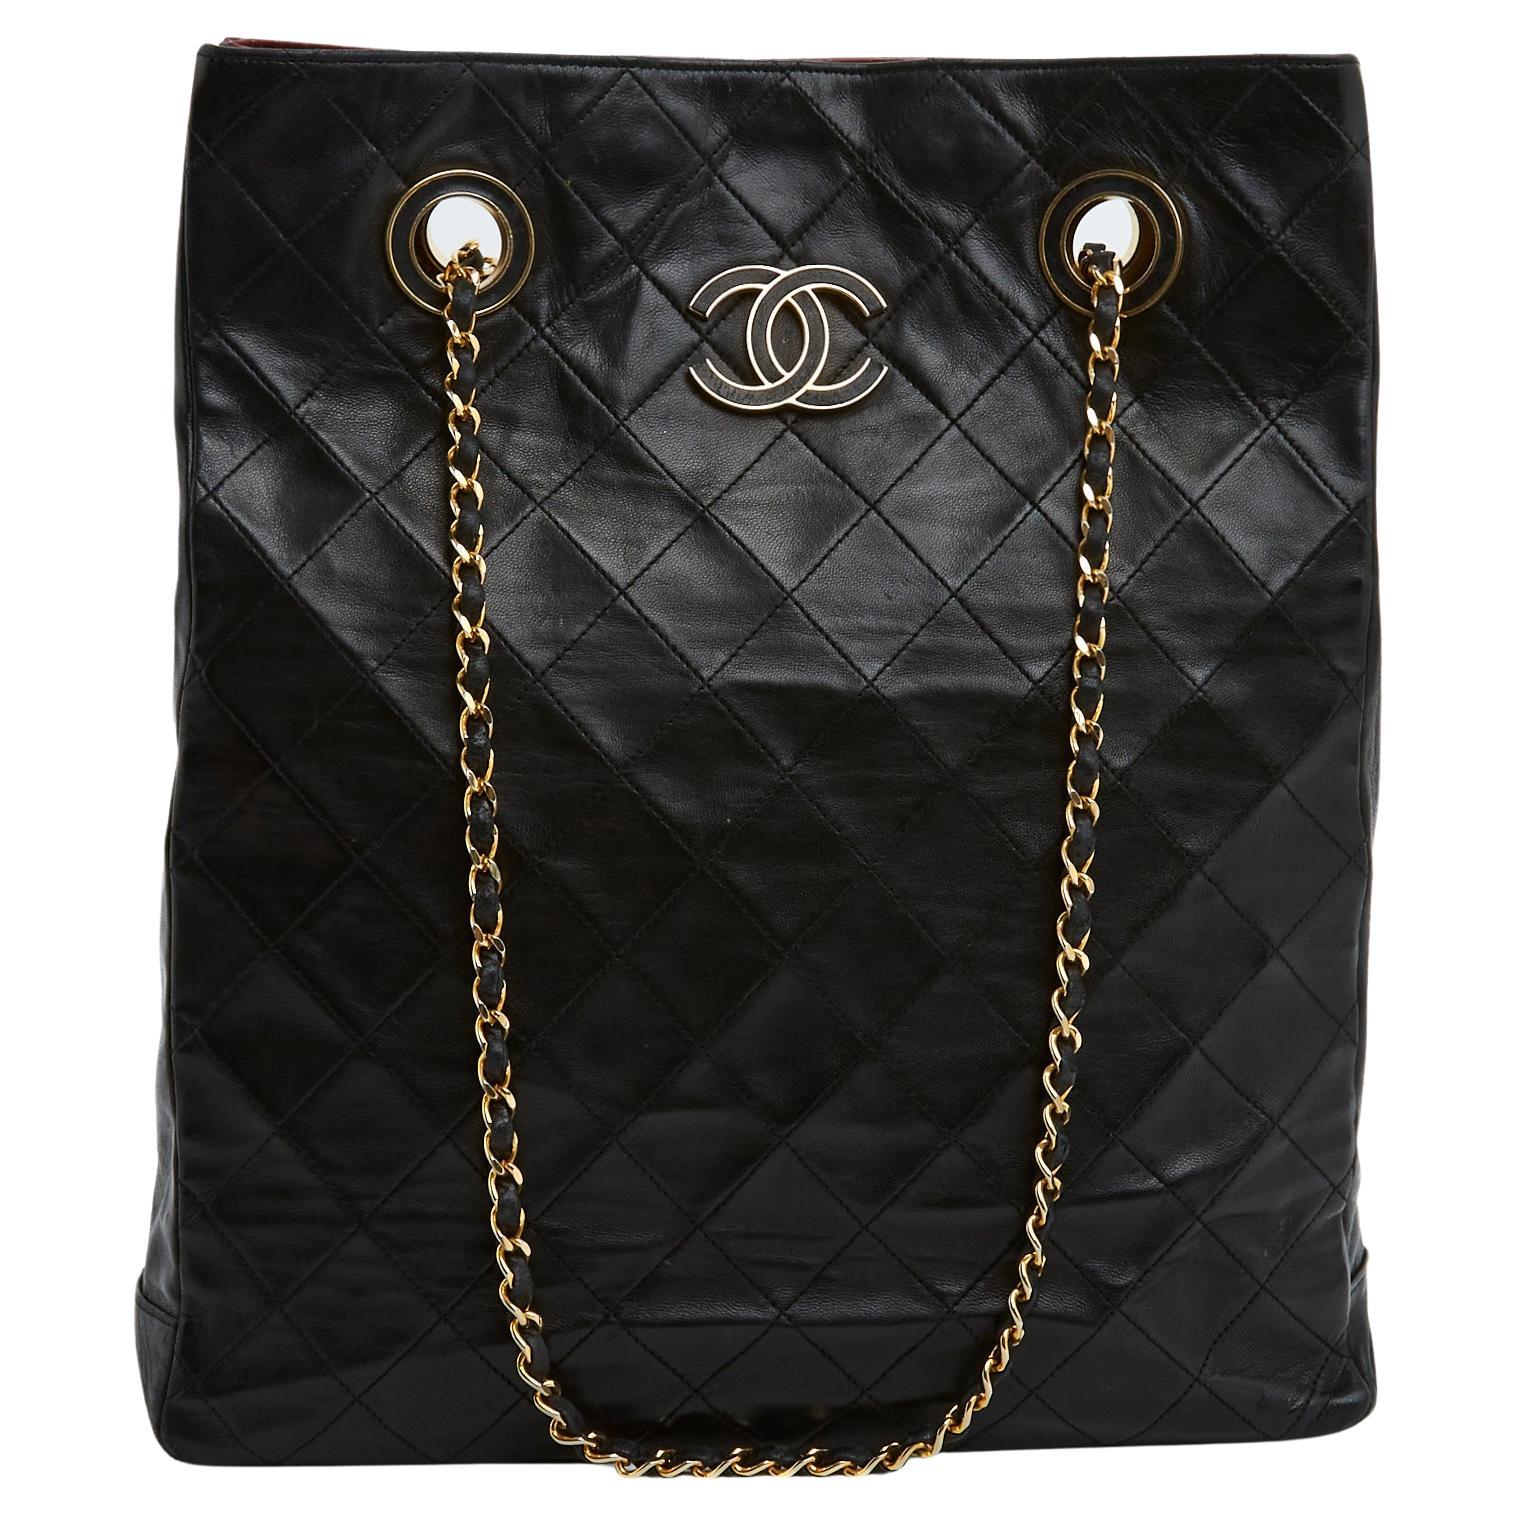 Chanel 1985 - 18 For Sale on 1stDibs  1985 chanel bag, chanel 1985  collection, 1985 chanel